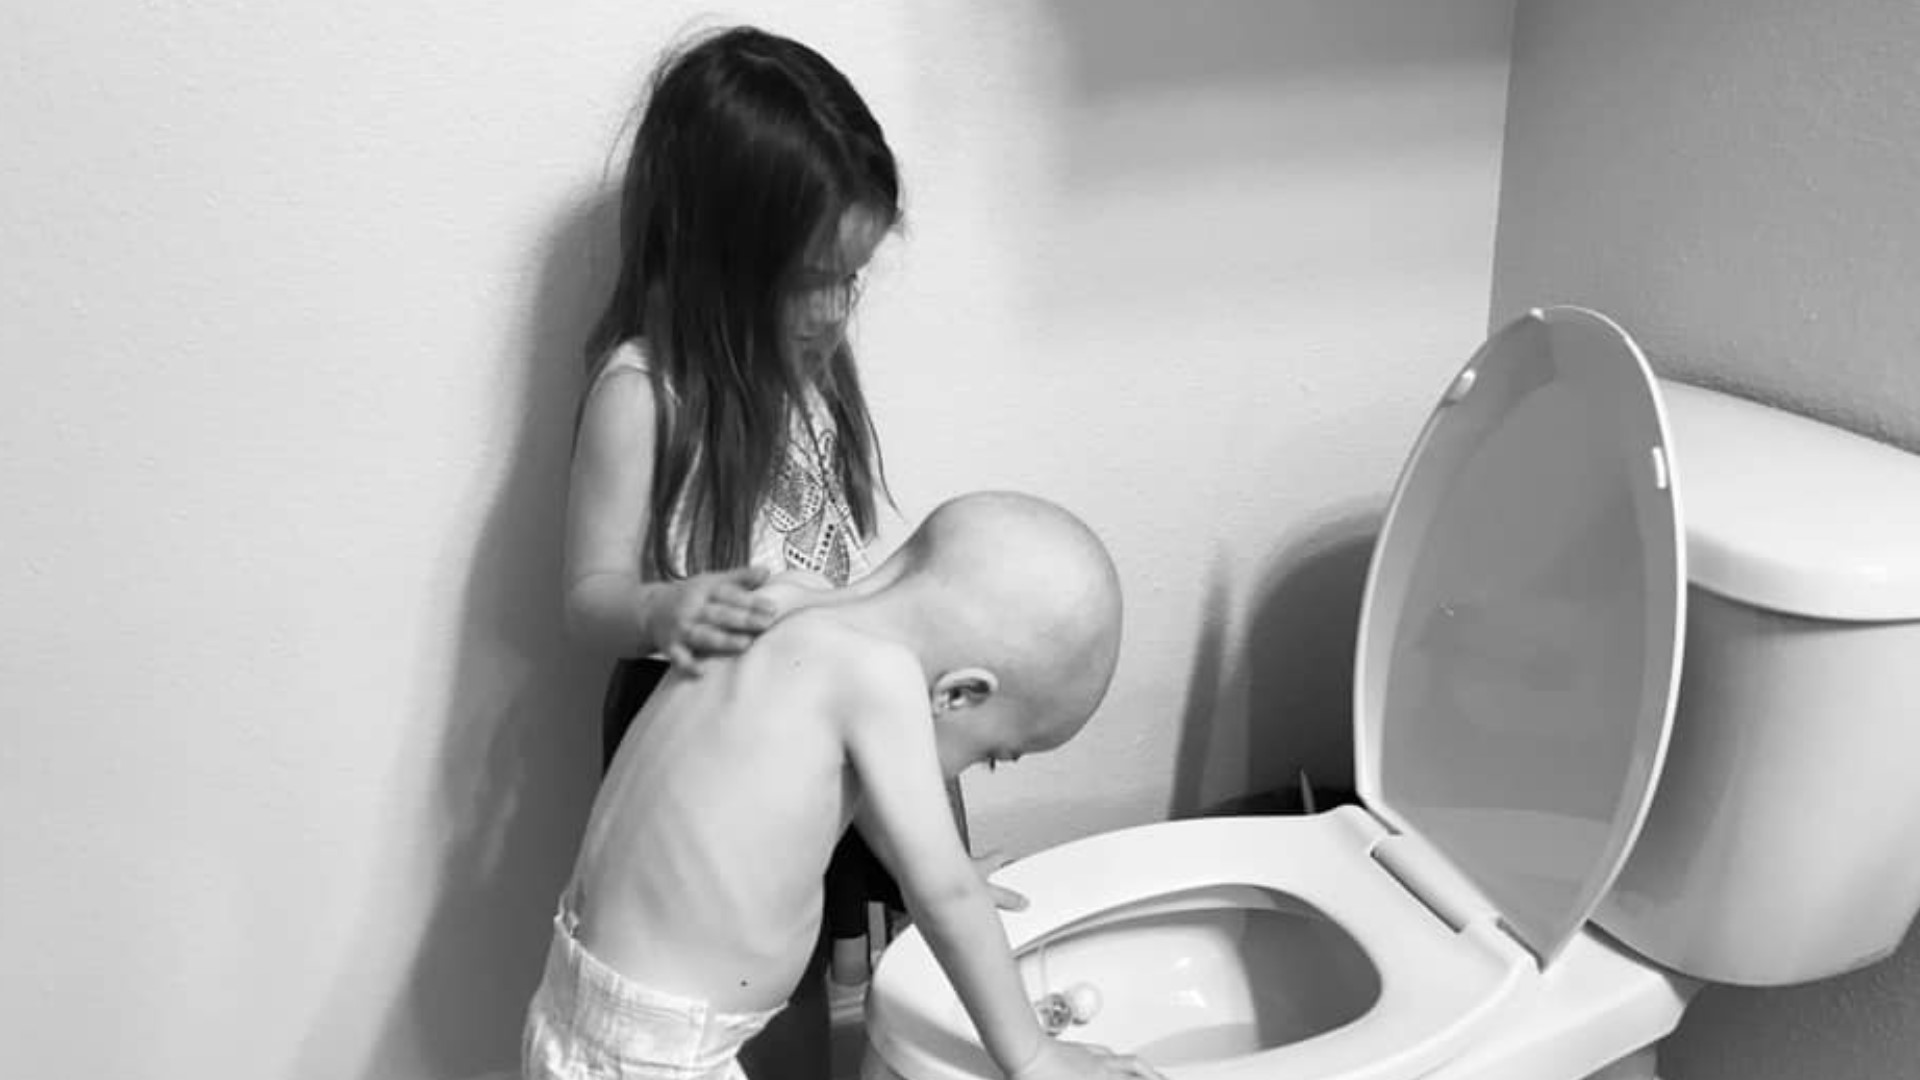 The pictures are not pleasant and they are not supposed to be. The first shows a 4-year-old boy, bald from his first round of chemotherapy, standing over a toilet and reeling from the nausea his treatments bring. His 5-year-old sister stands at his side, her hand on his shoulder, trying to comfort him when no one else can.